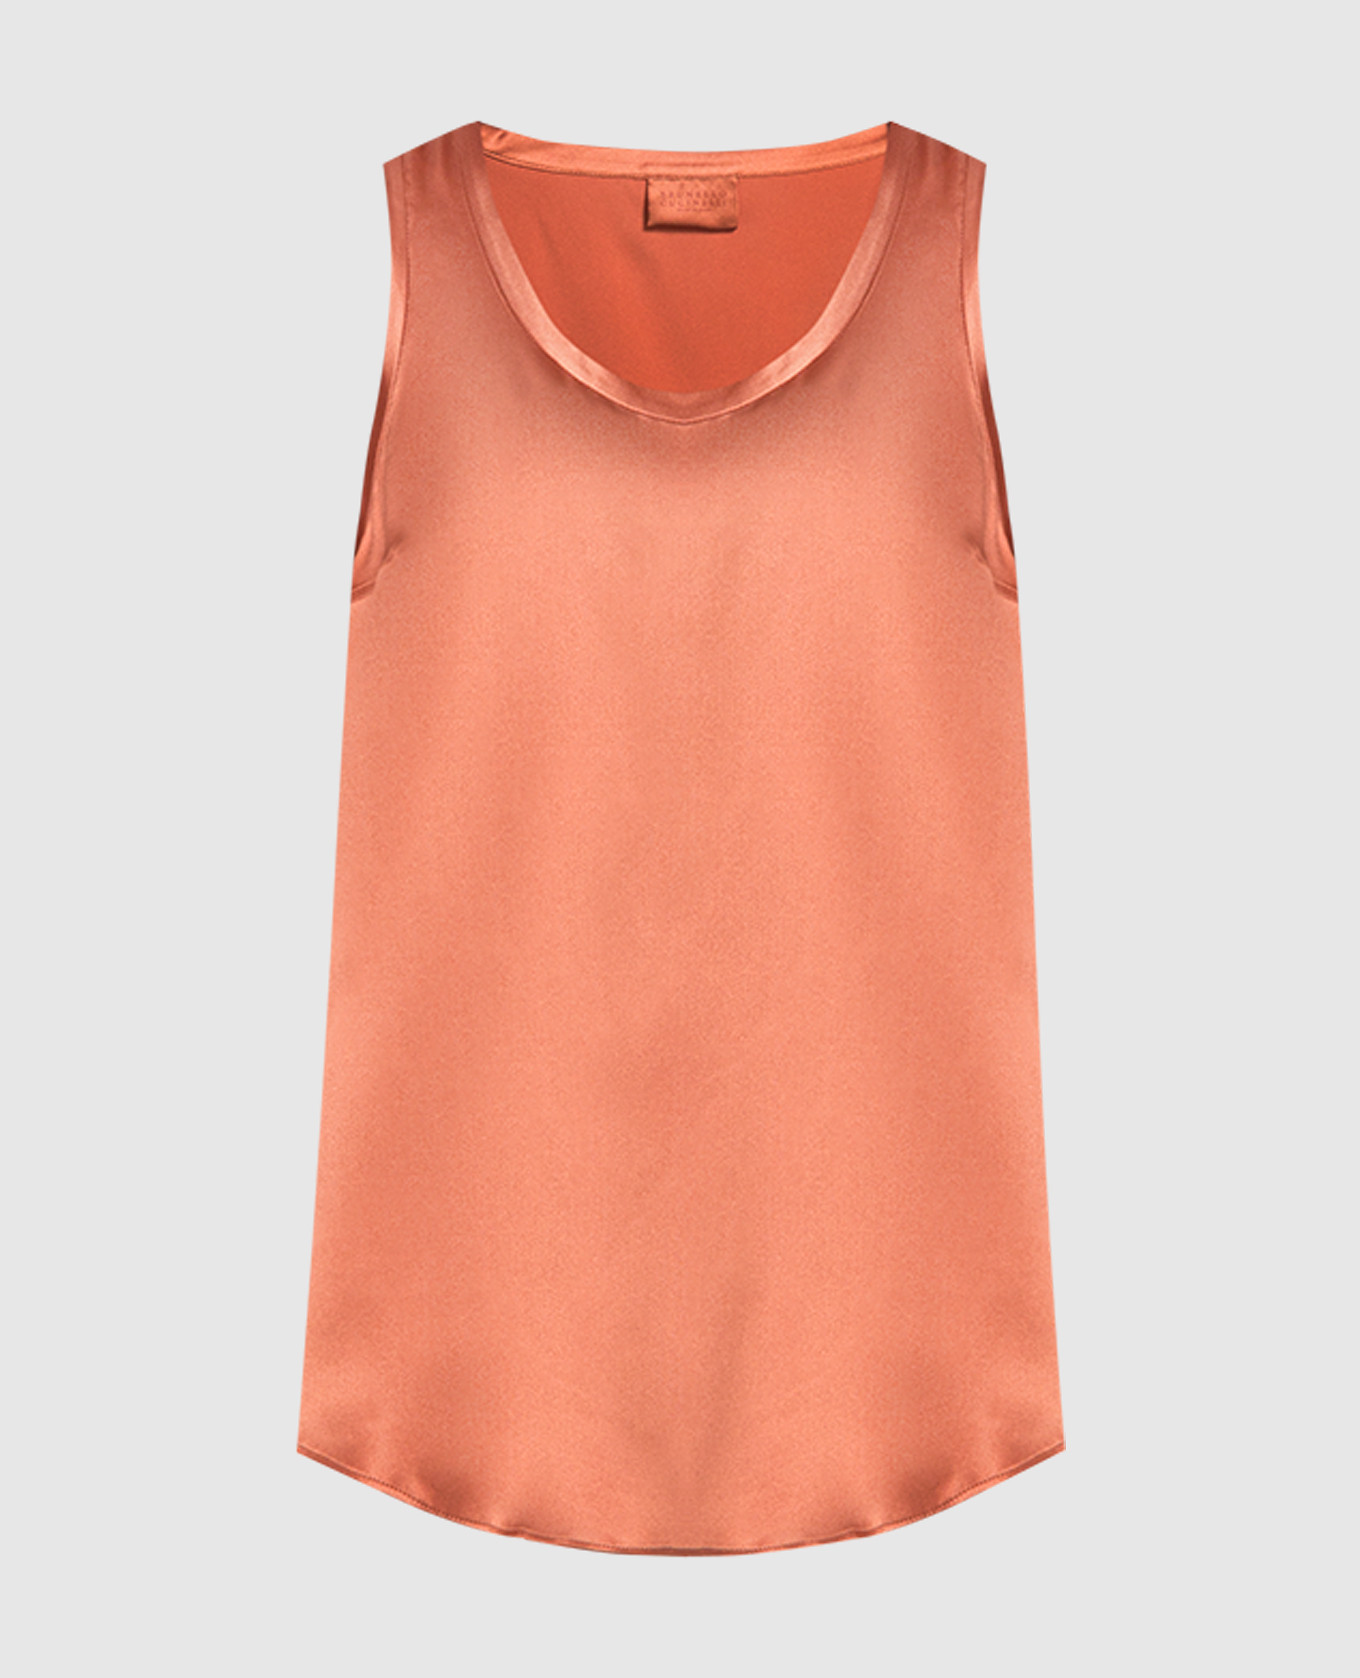 Terracotta top in silk with scalloped hem